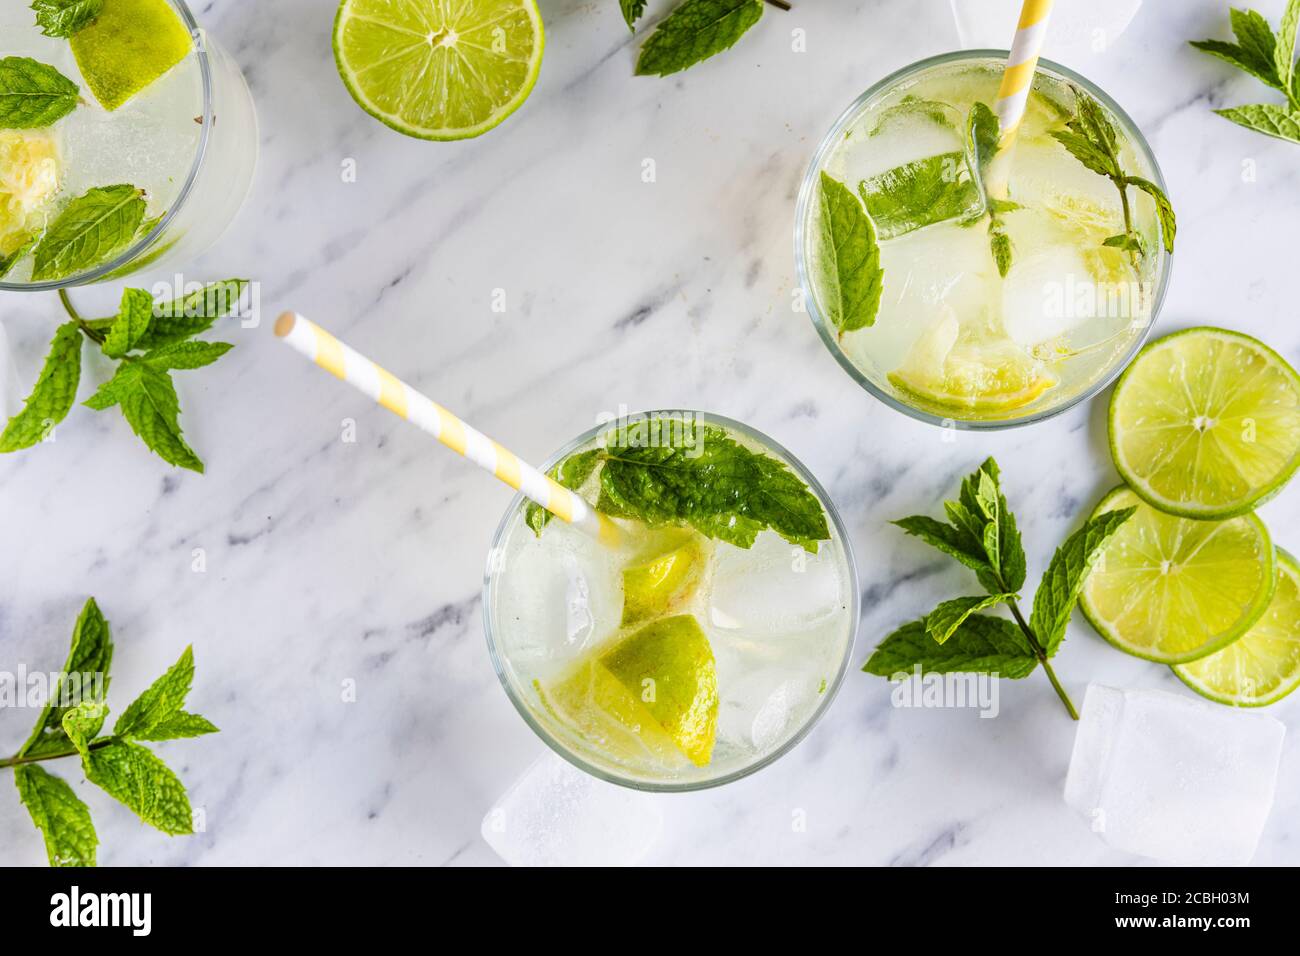 Mojito cocktail or mocktail, traditional fresh drink with lime and mint. With paper straws in the drinks. Top view, from above. On a white marble tabl Stock Photo